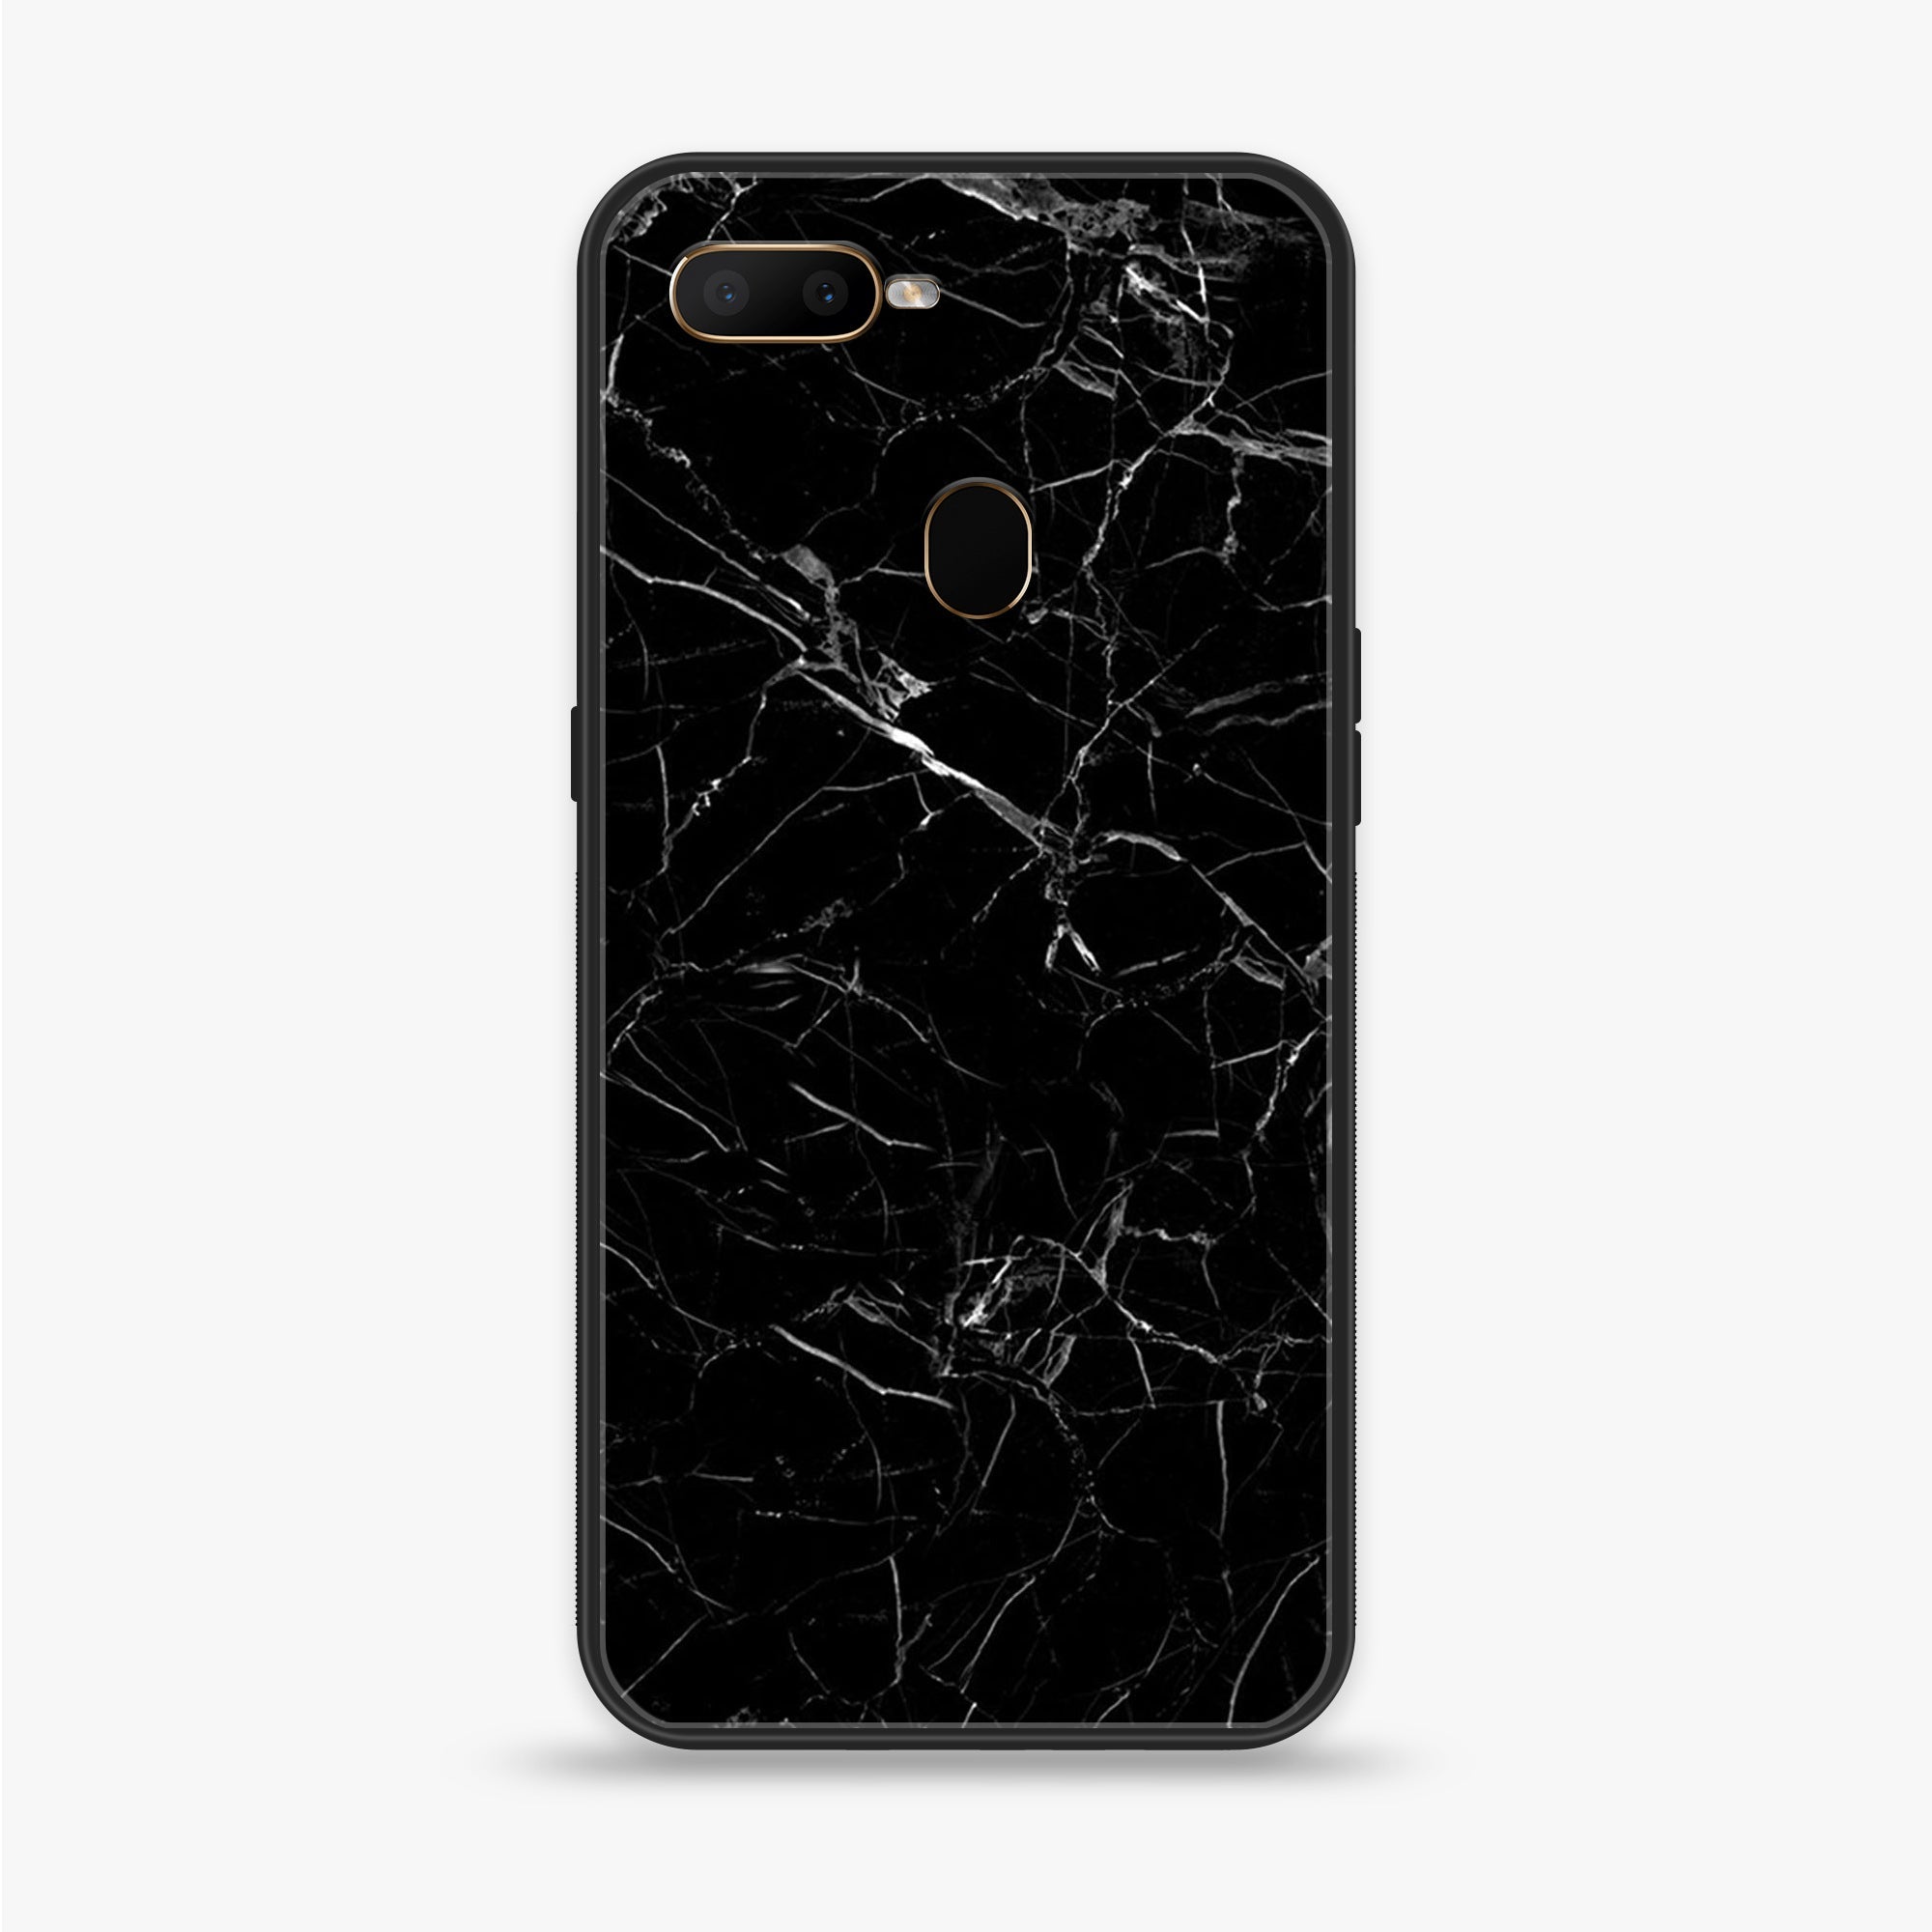 Oppo A7 - Black Marble Series - Premium Printed Glass soft Bumper shock Proof Case